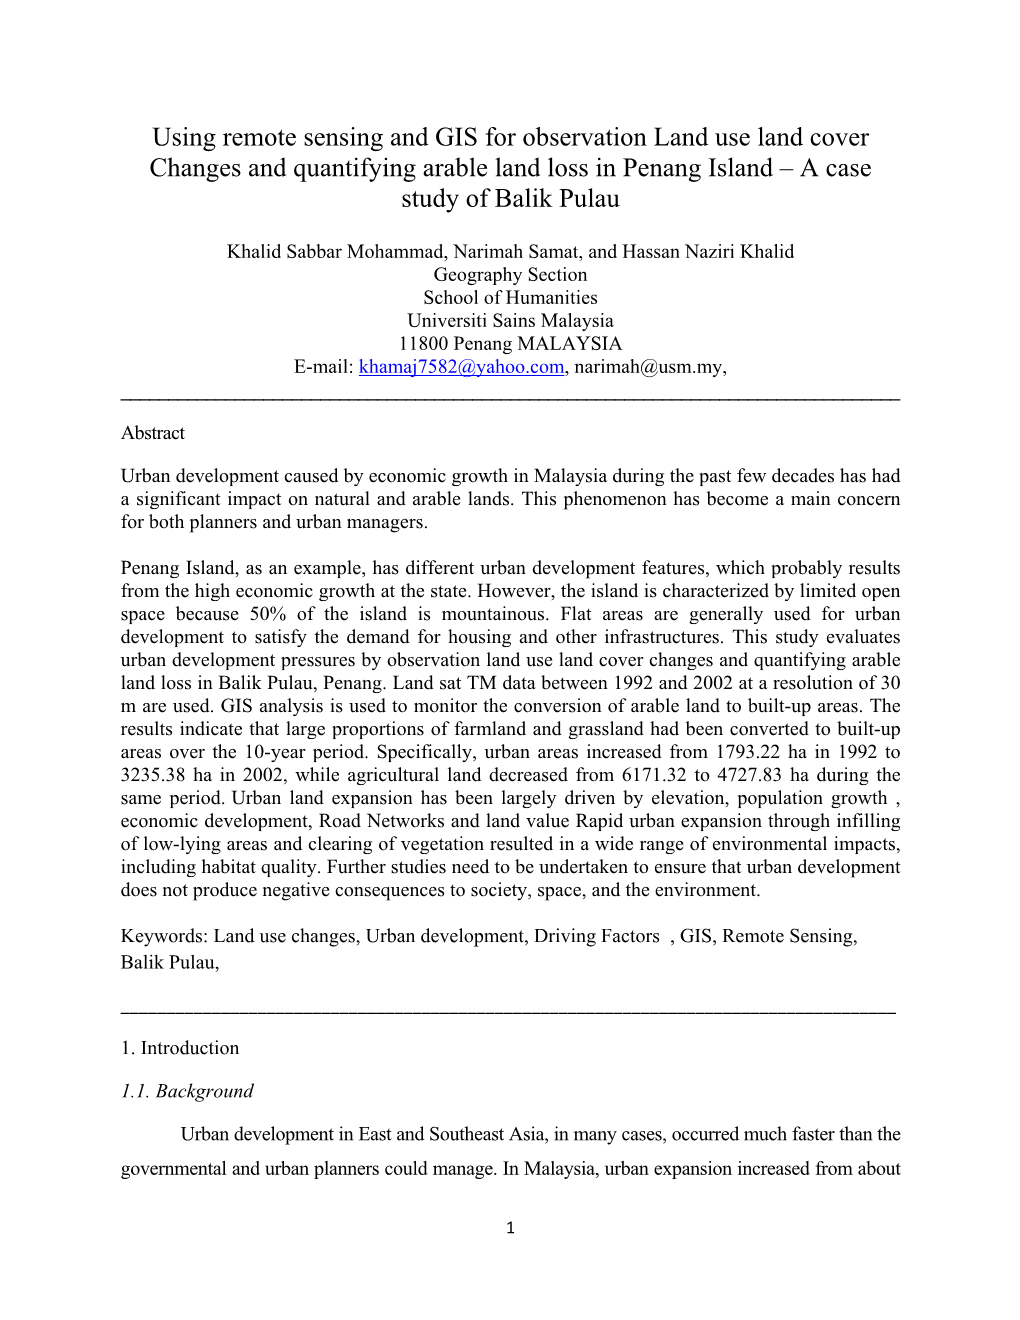 Using Remote Sensing and GIS for Observation Land Use Land Cover Changes and Quantifying Arable Land Loss in Penang Island – a Case Study of Balik Pulau